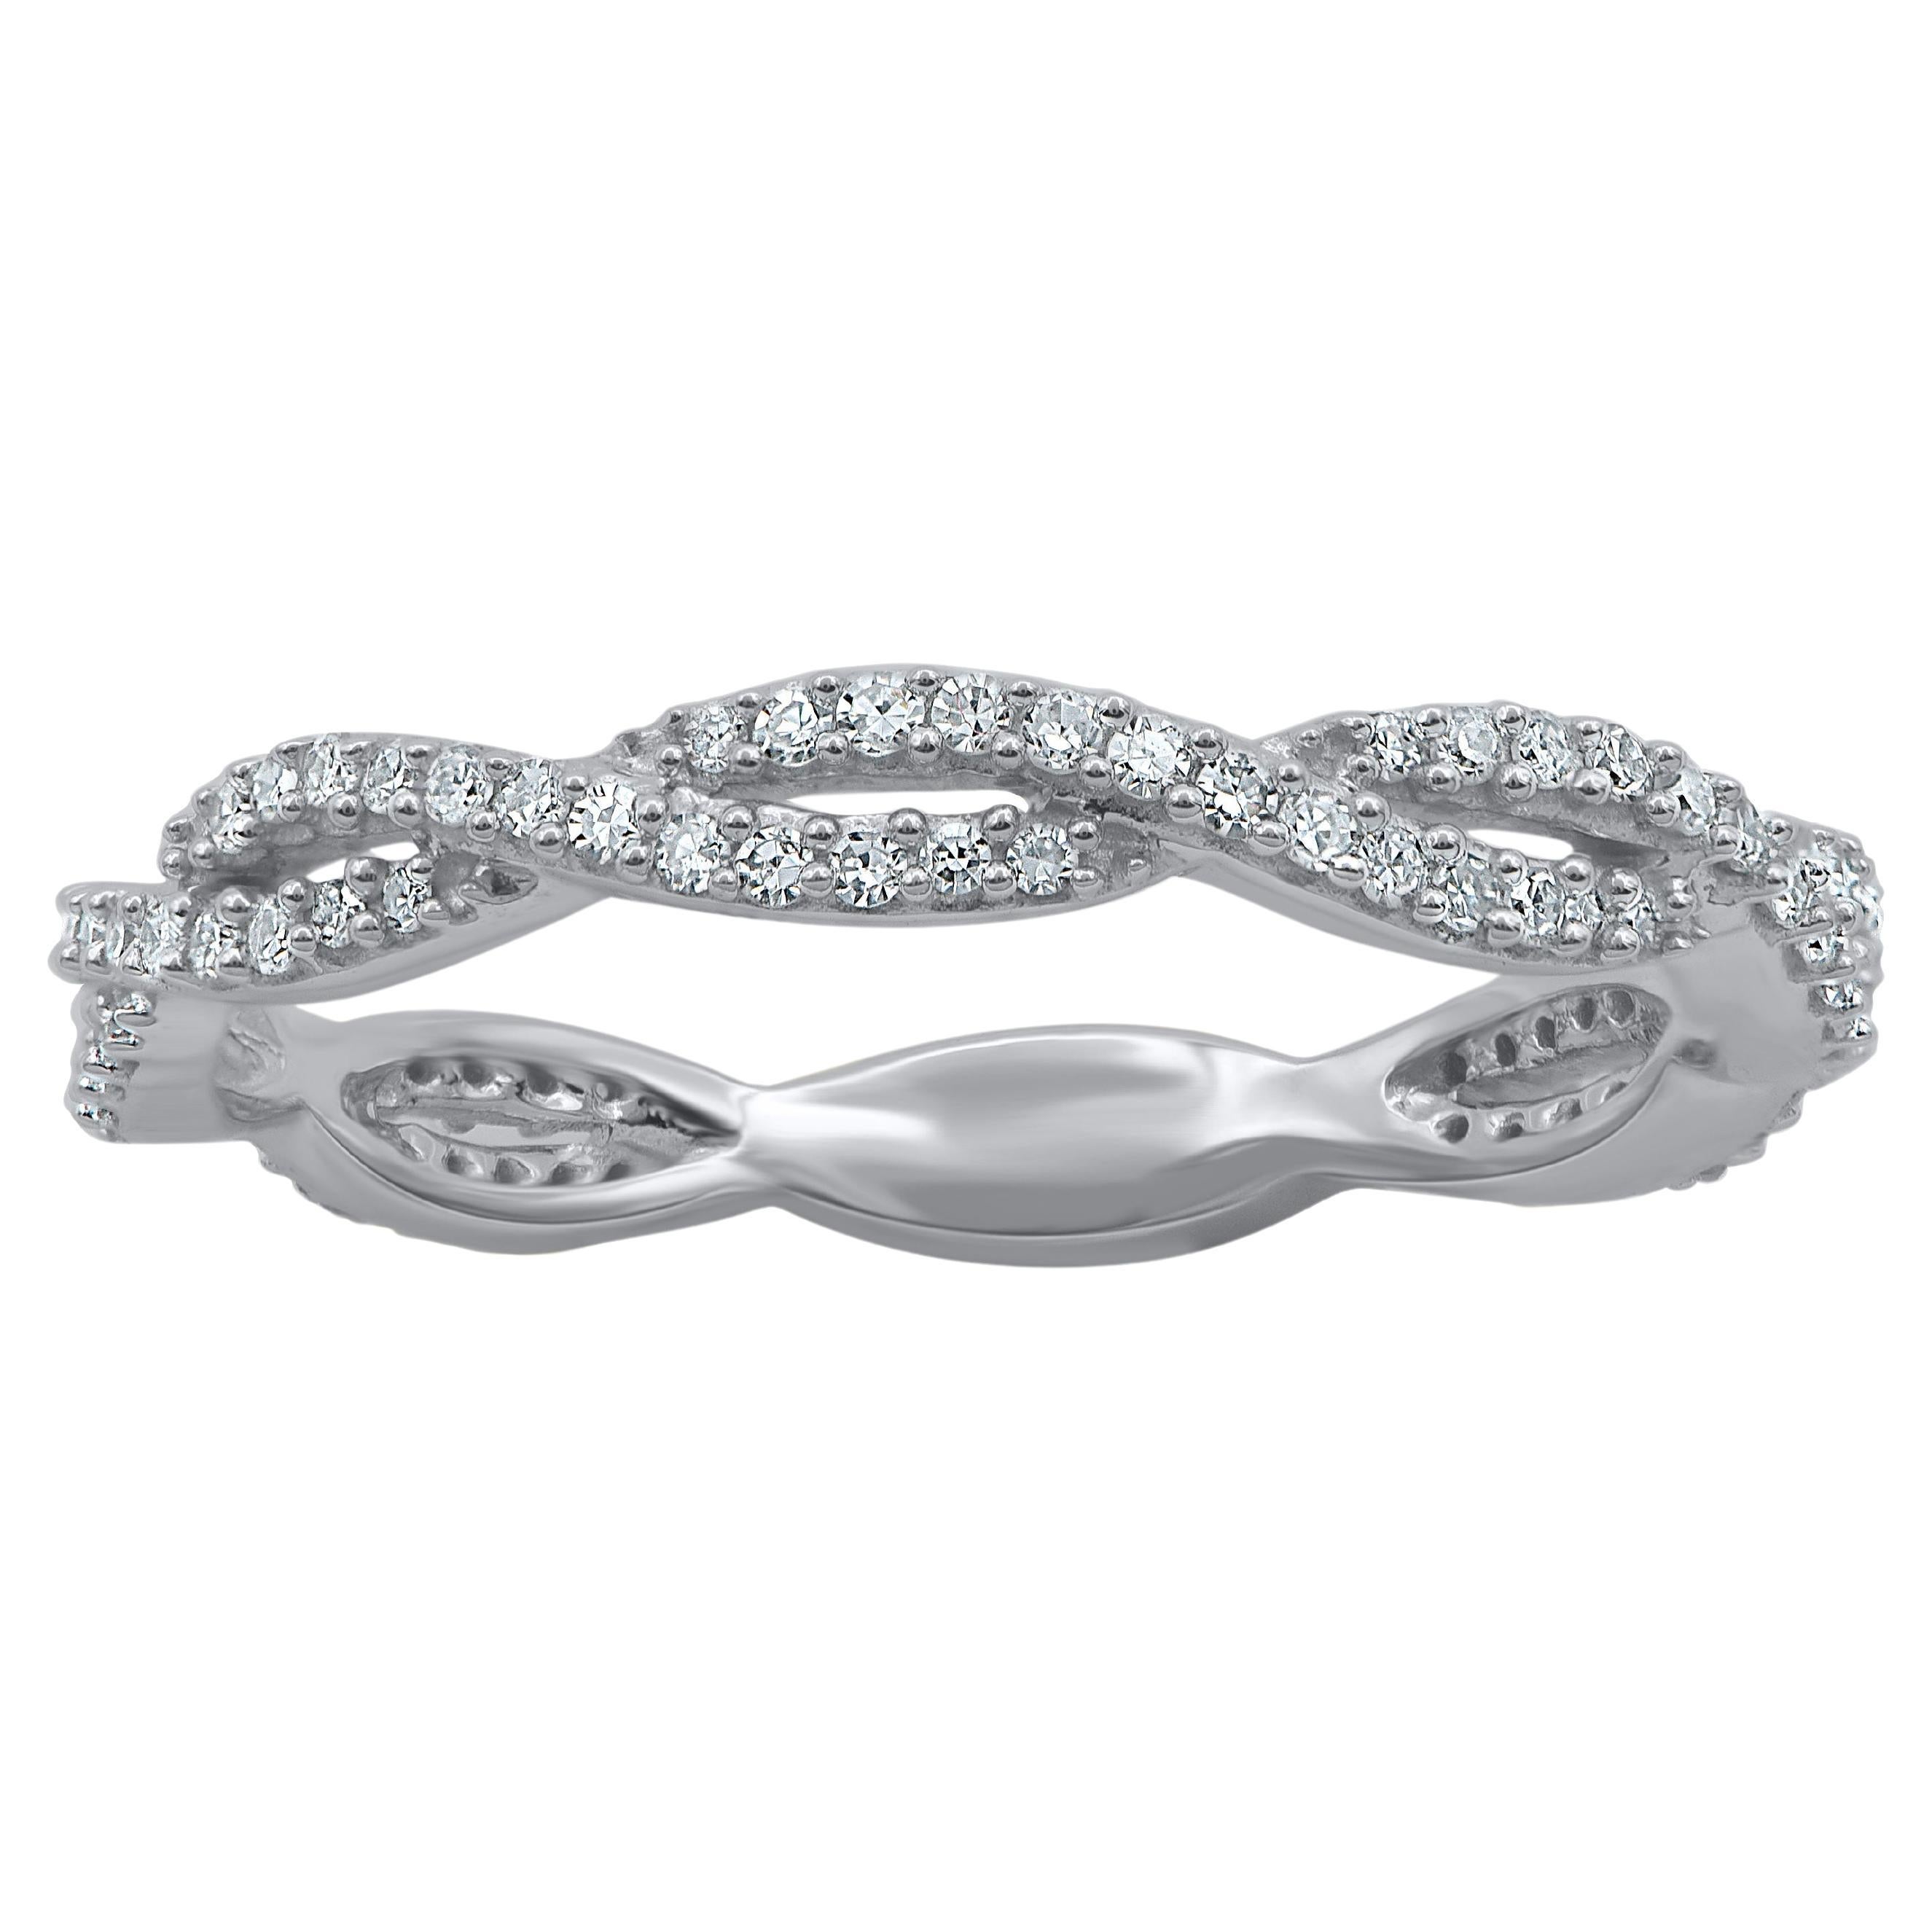 TJD 0.33 Carat Round Diamond Twisted Eternity Band Ring in 14 Karat White Gold For Sale